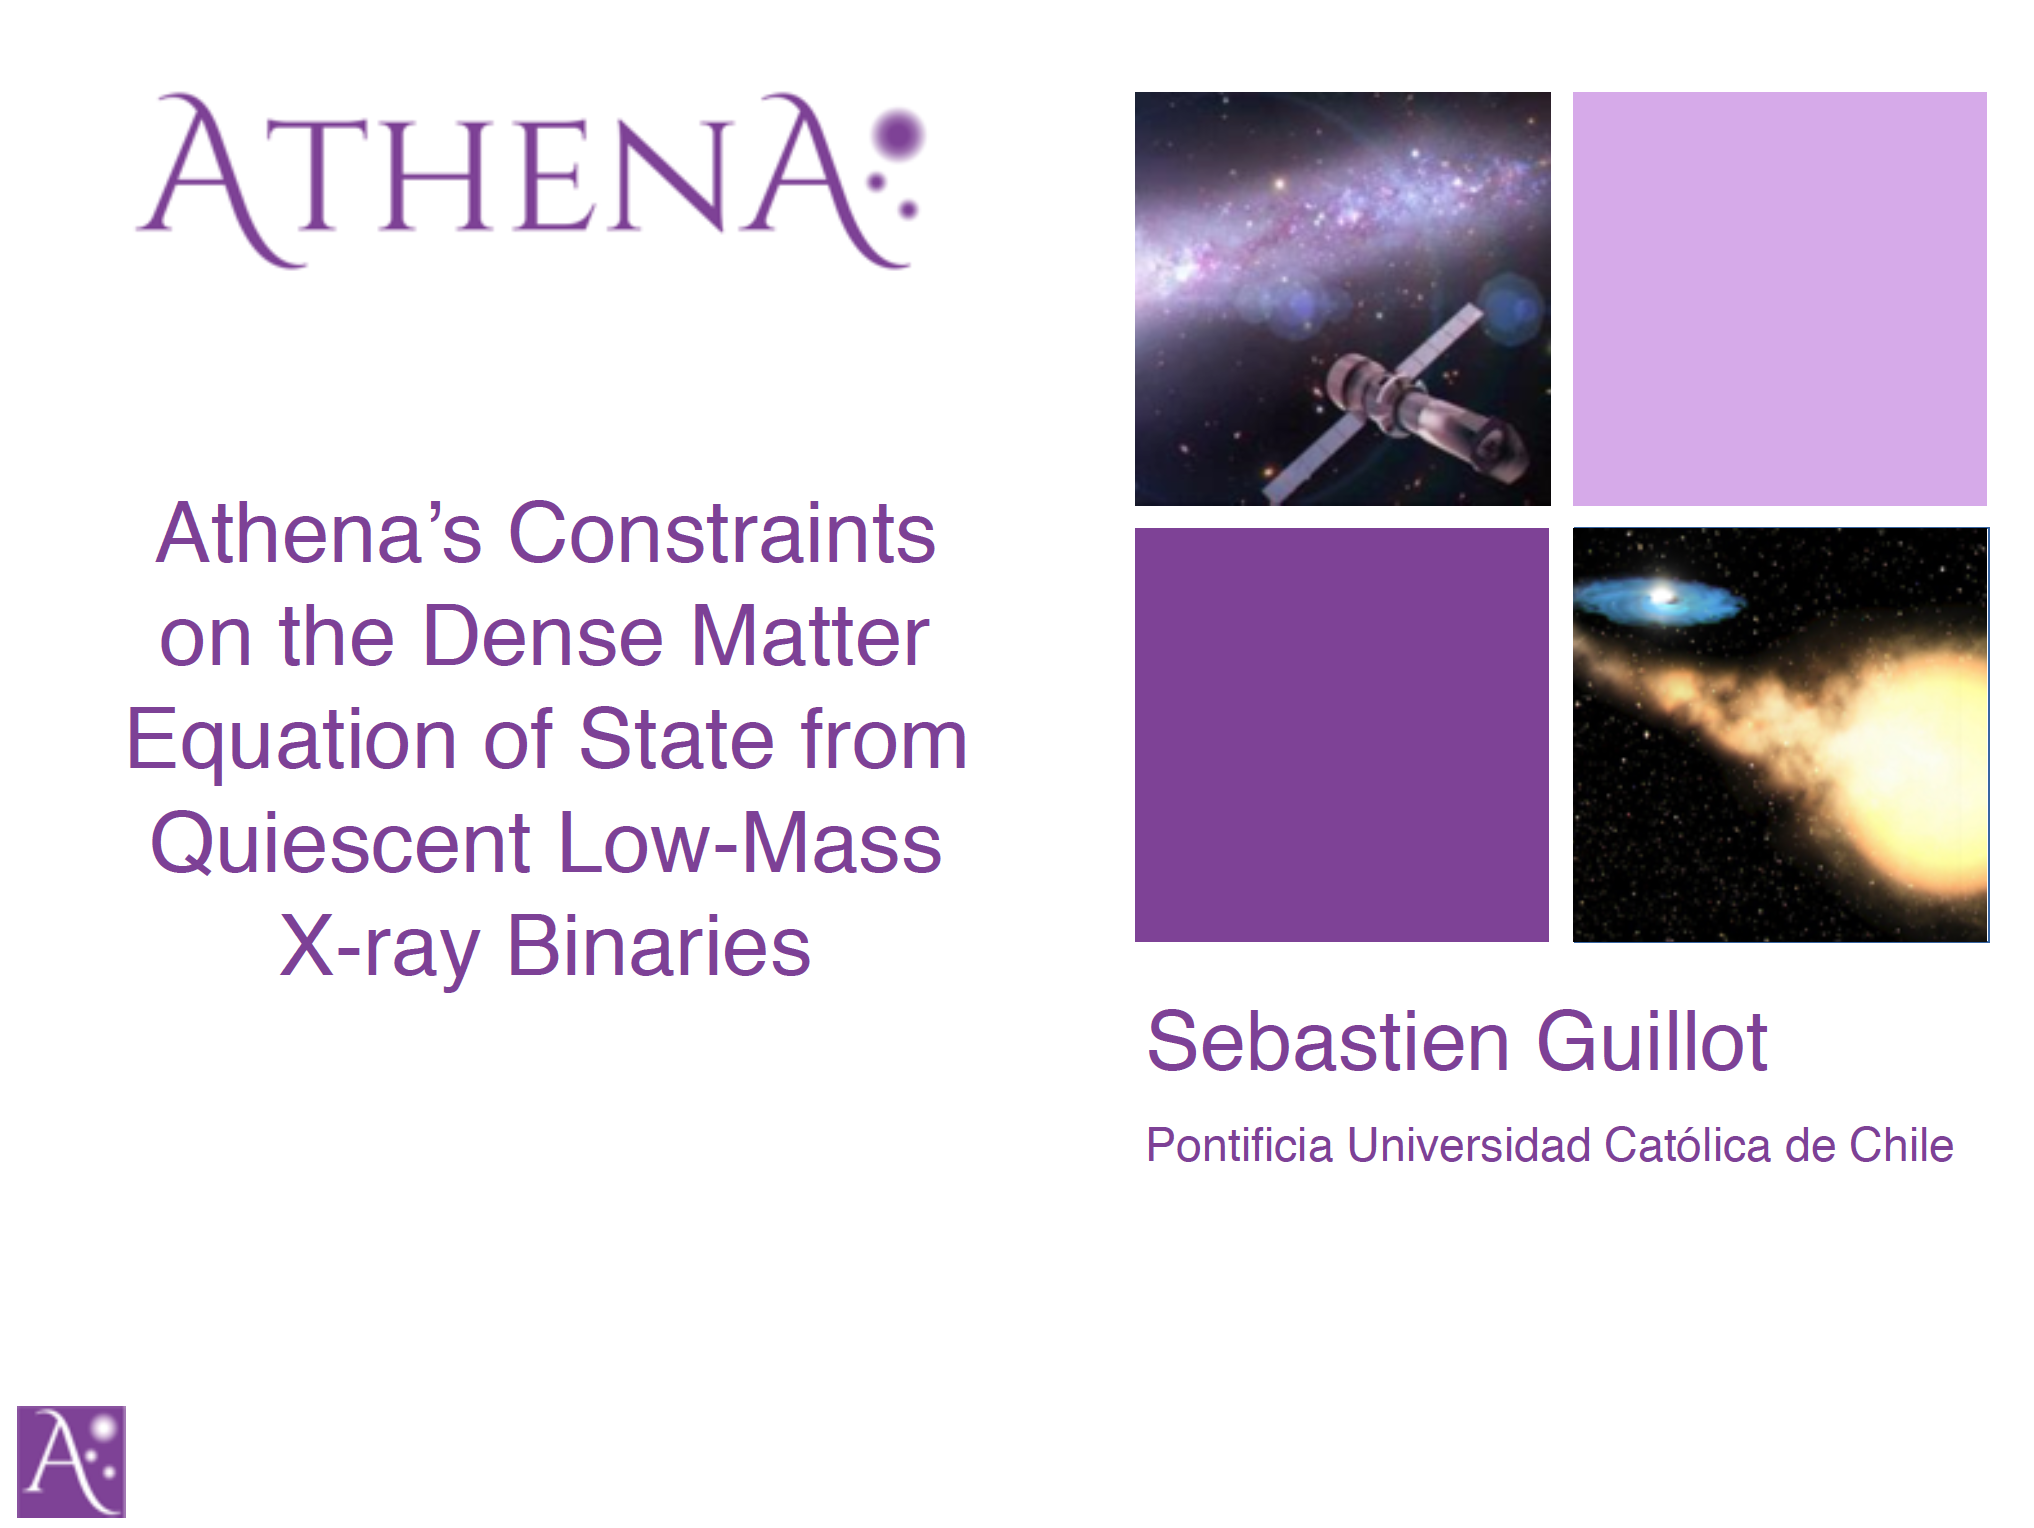 Athena’s Constraints on the Dense Matter Equation of State from Quiescent Low Mass X-ray Binaries